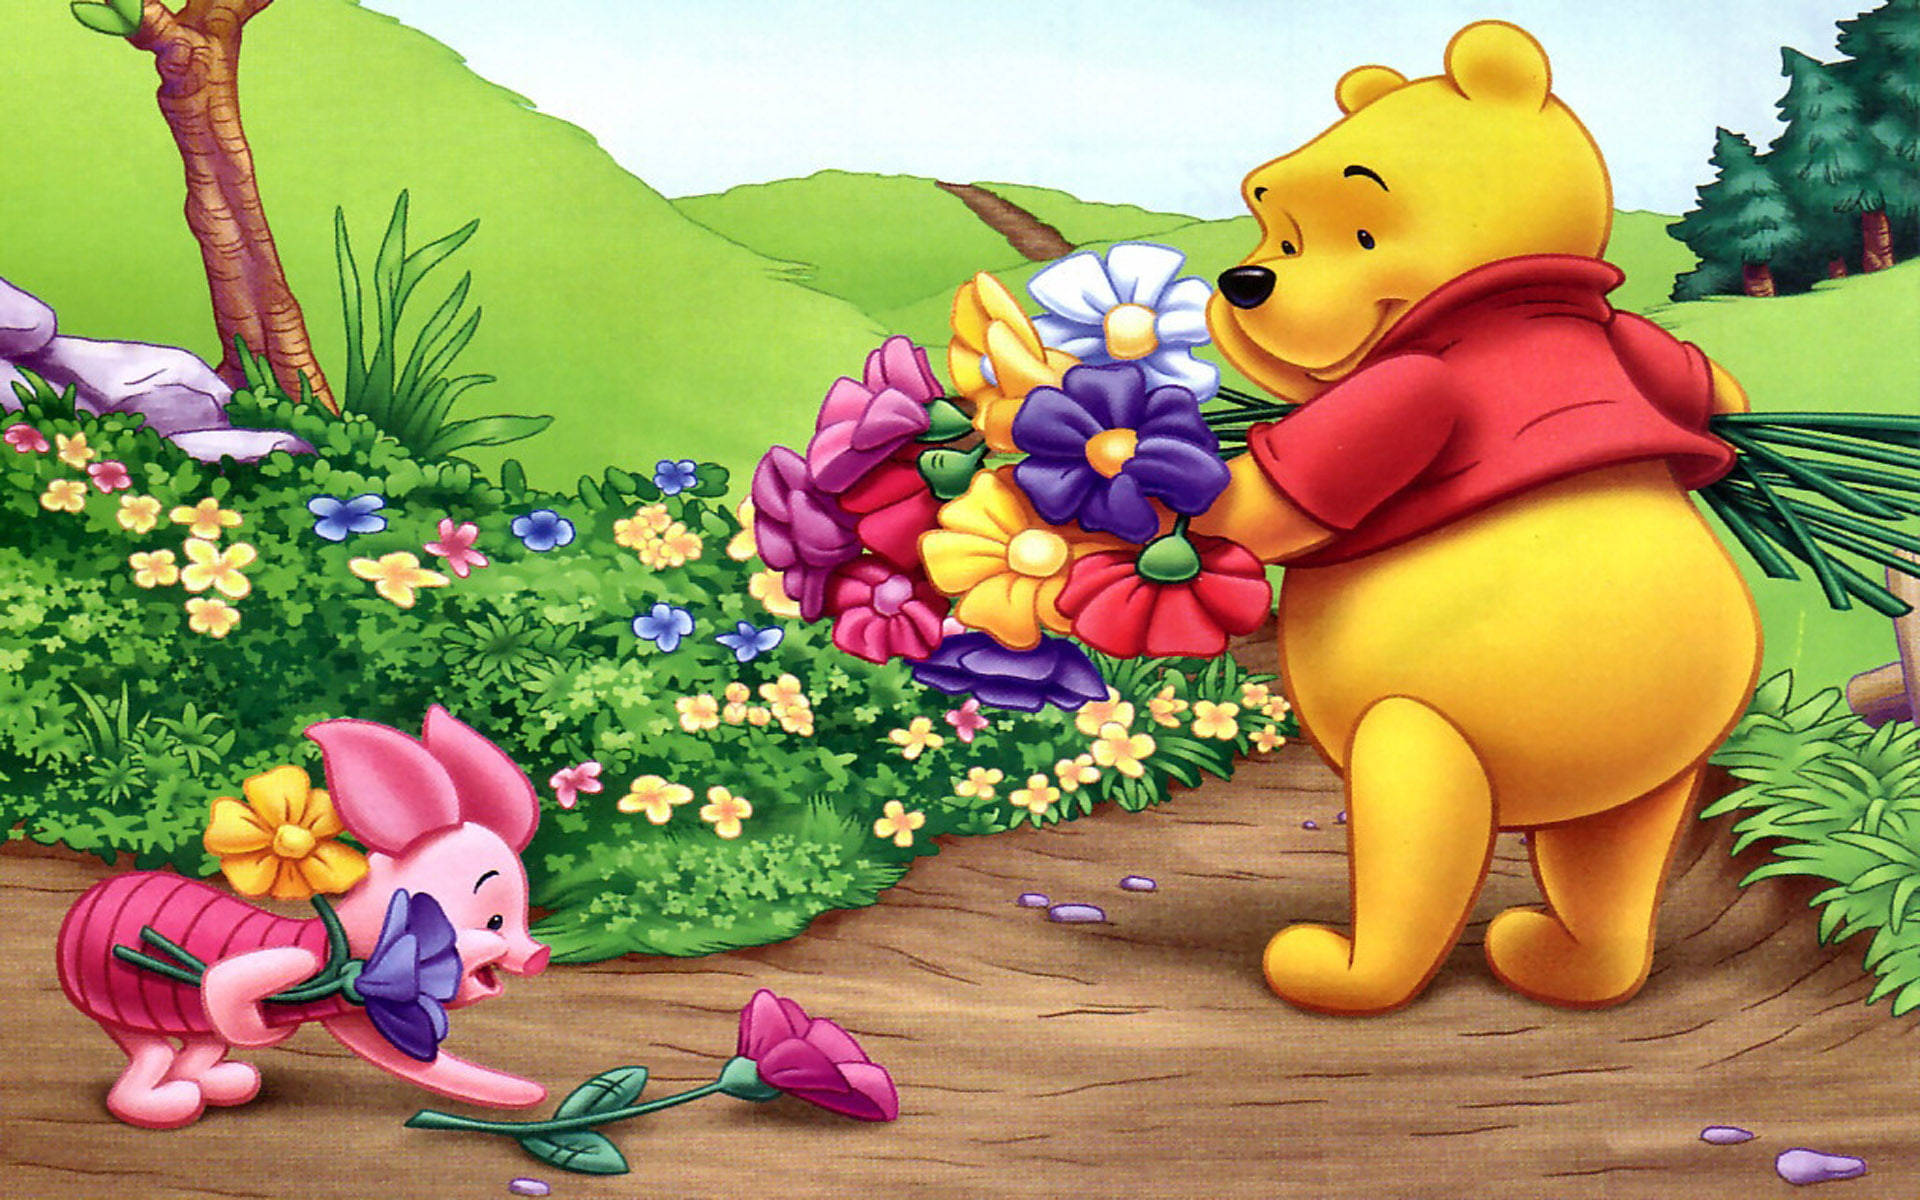 Cute Winnie The Pooh With Flowers Wallpaper